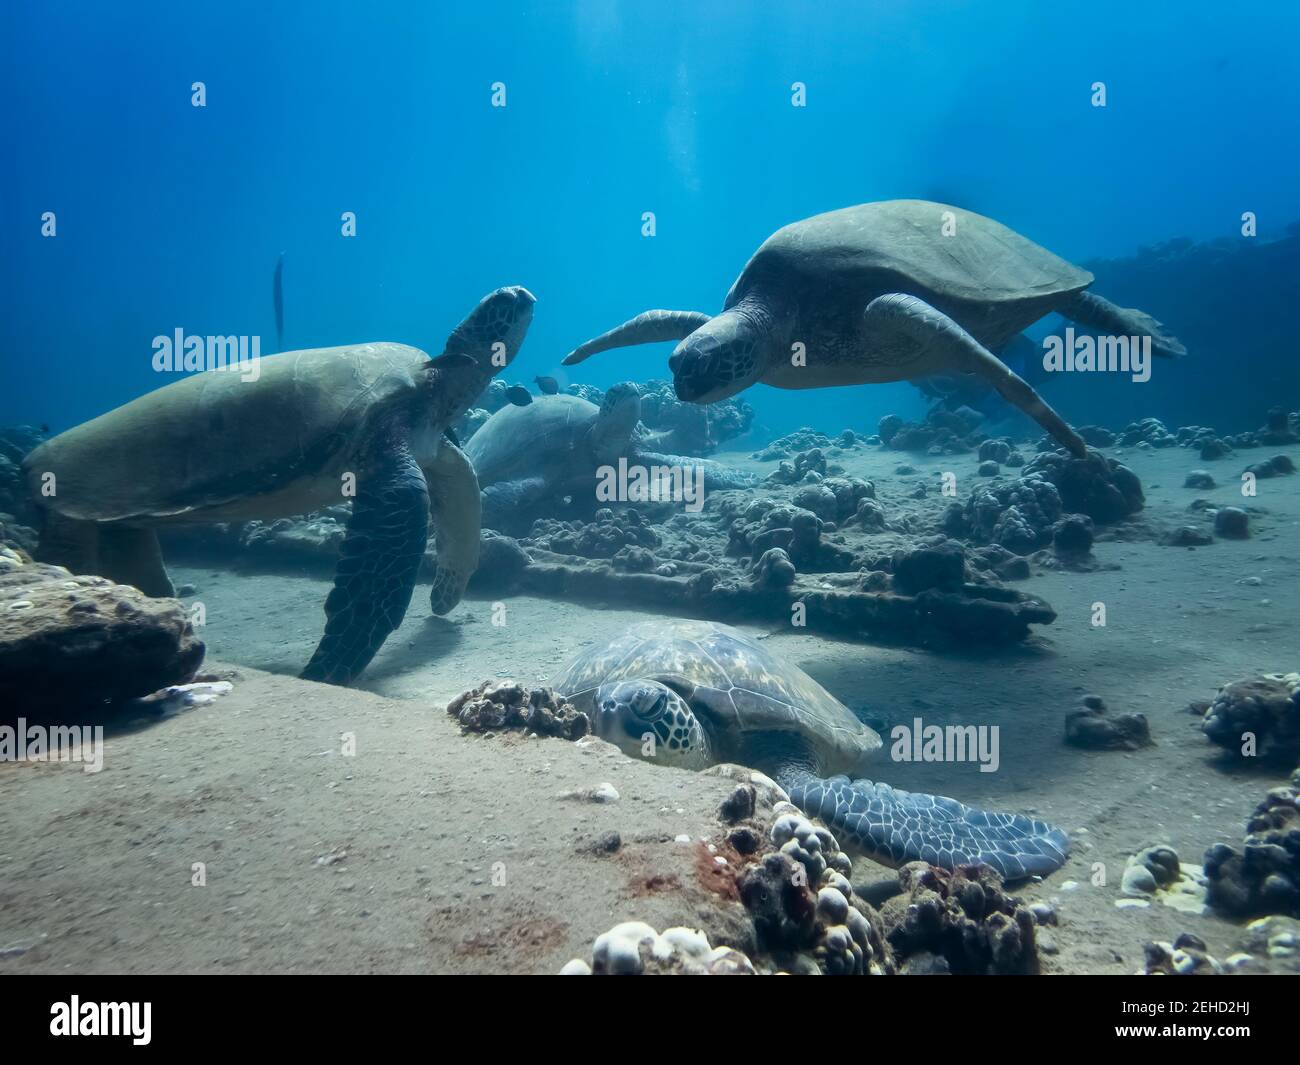 Group of Hawaiian green sea turtles gathered together on coral reef underwater with fish. Stock Photo